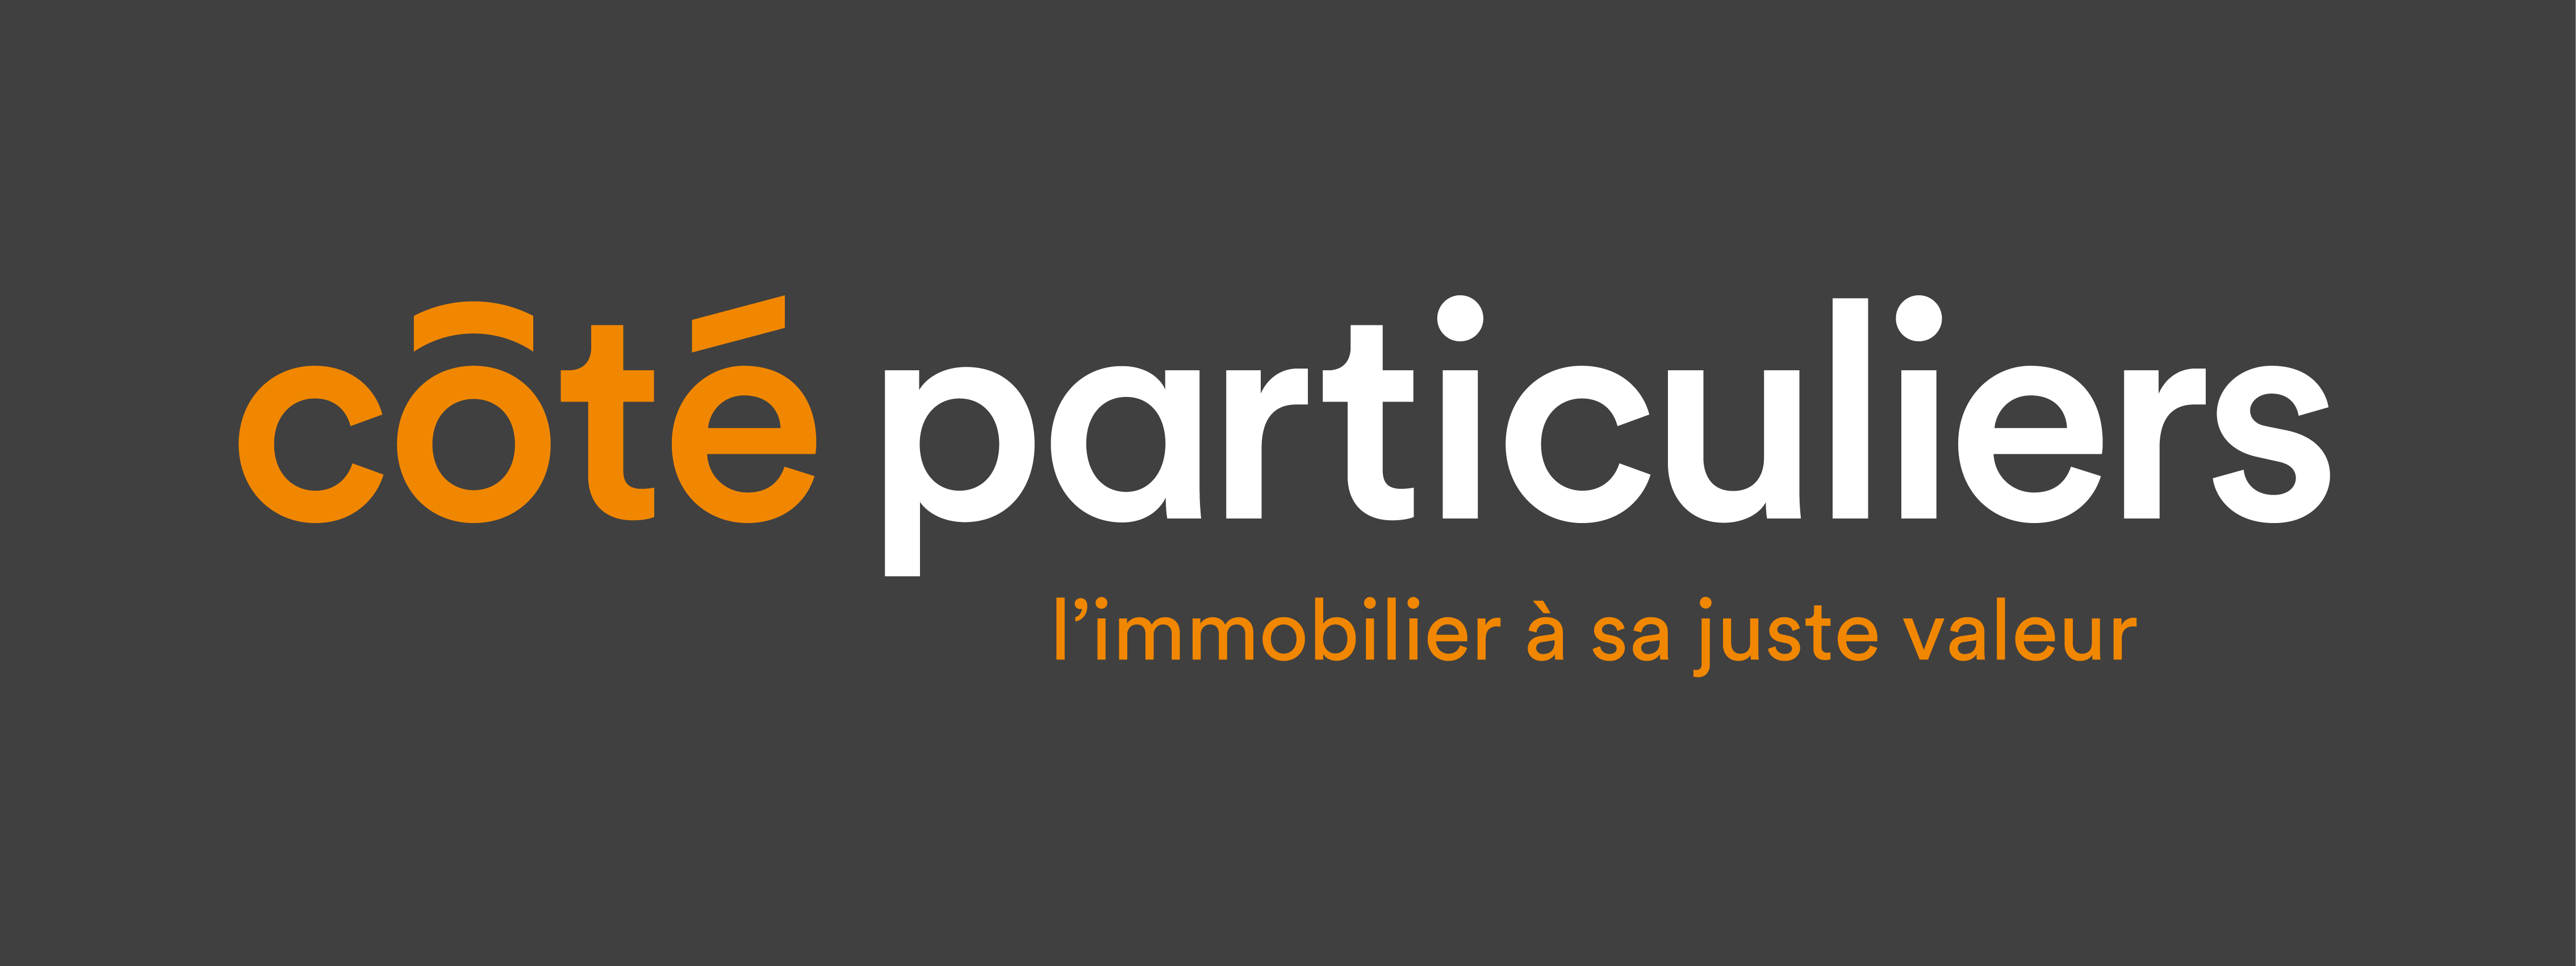 COTE PARTICULIERS DEUIL